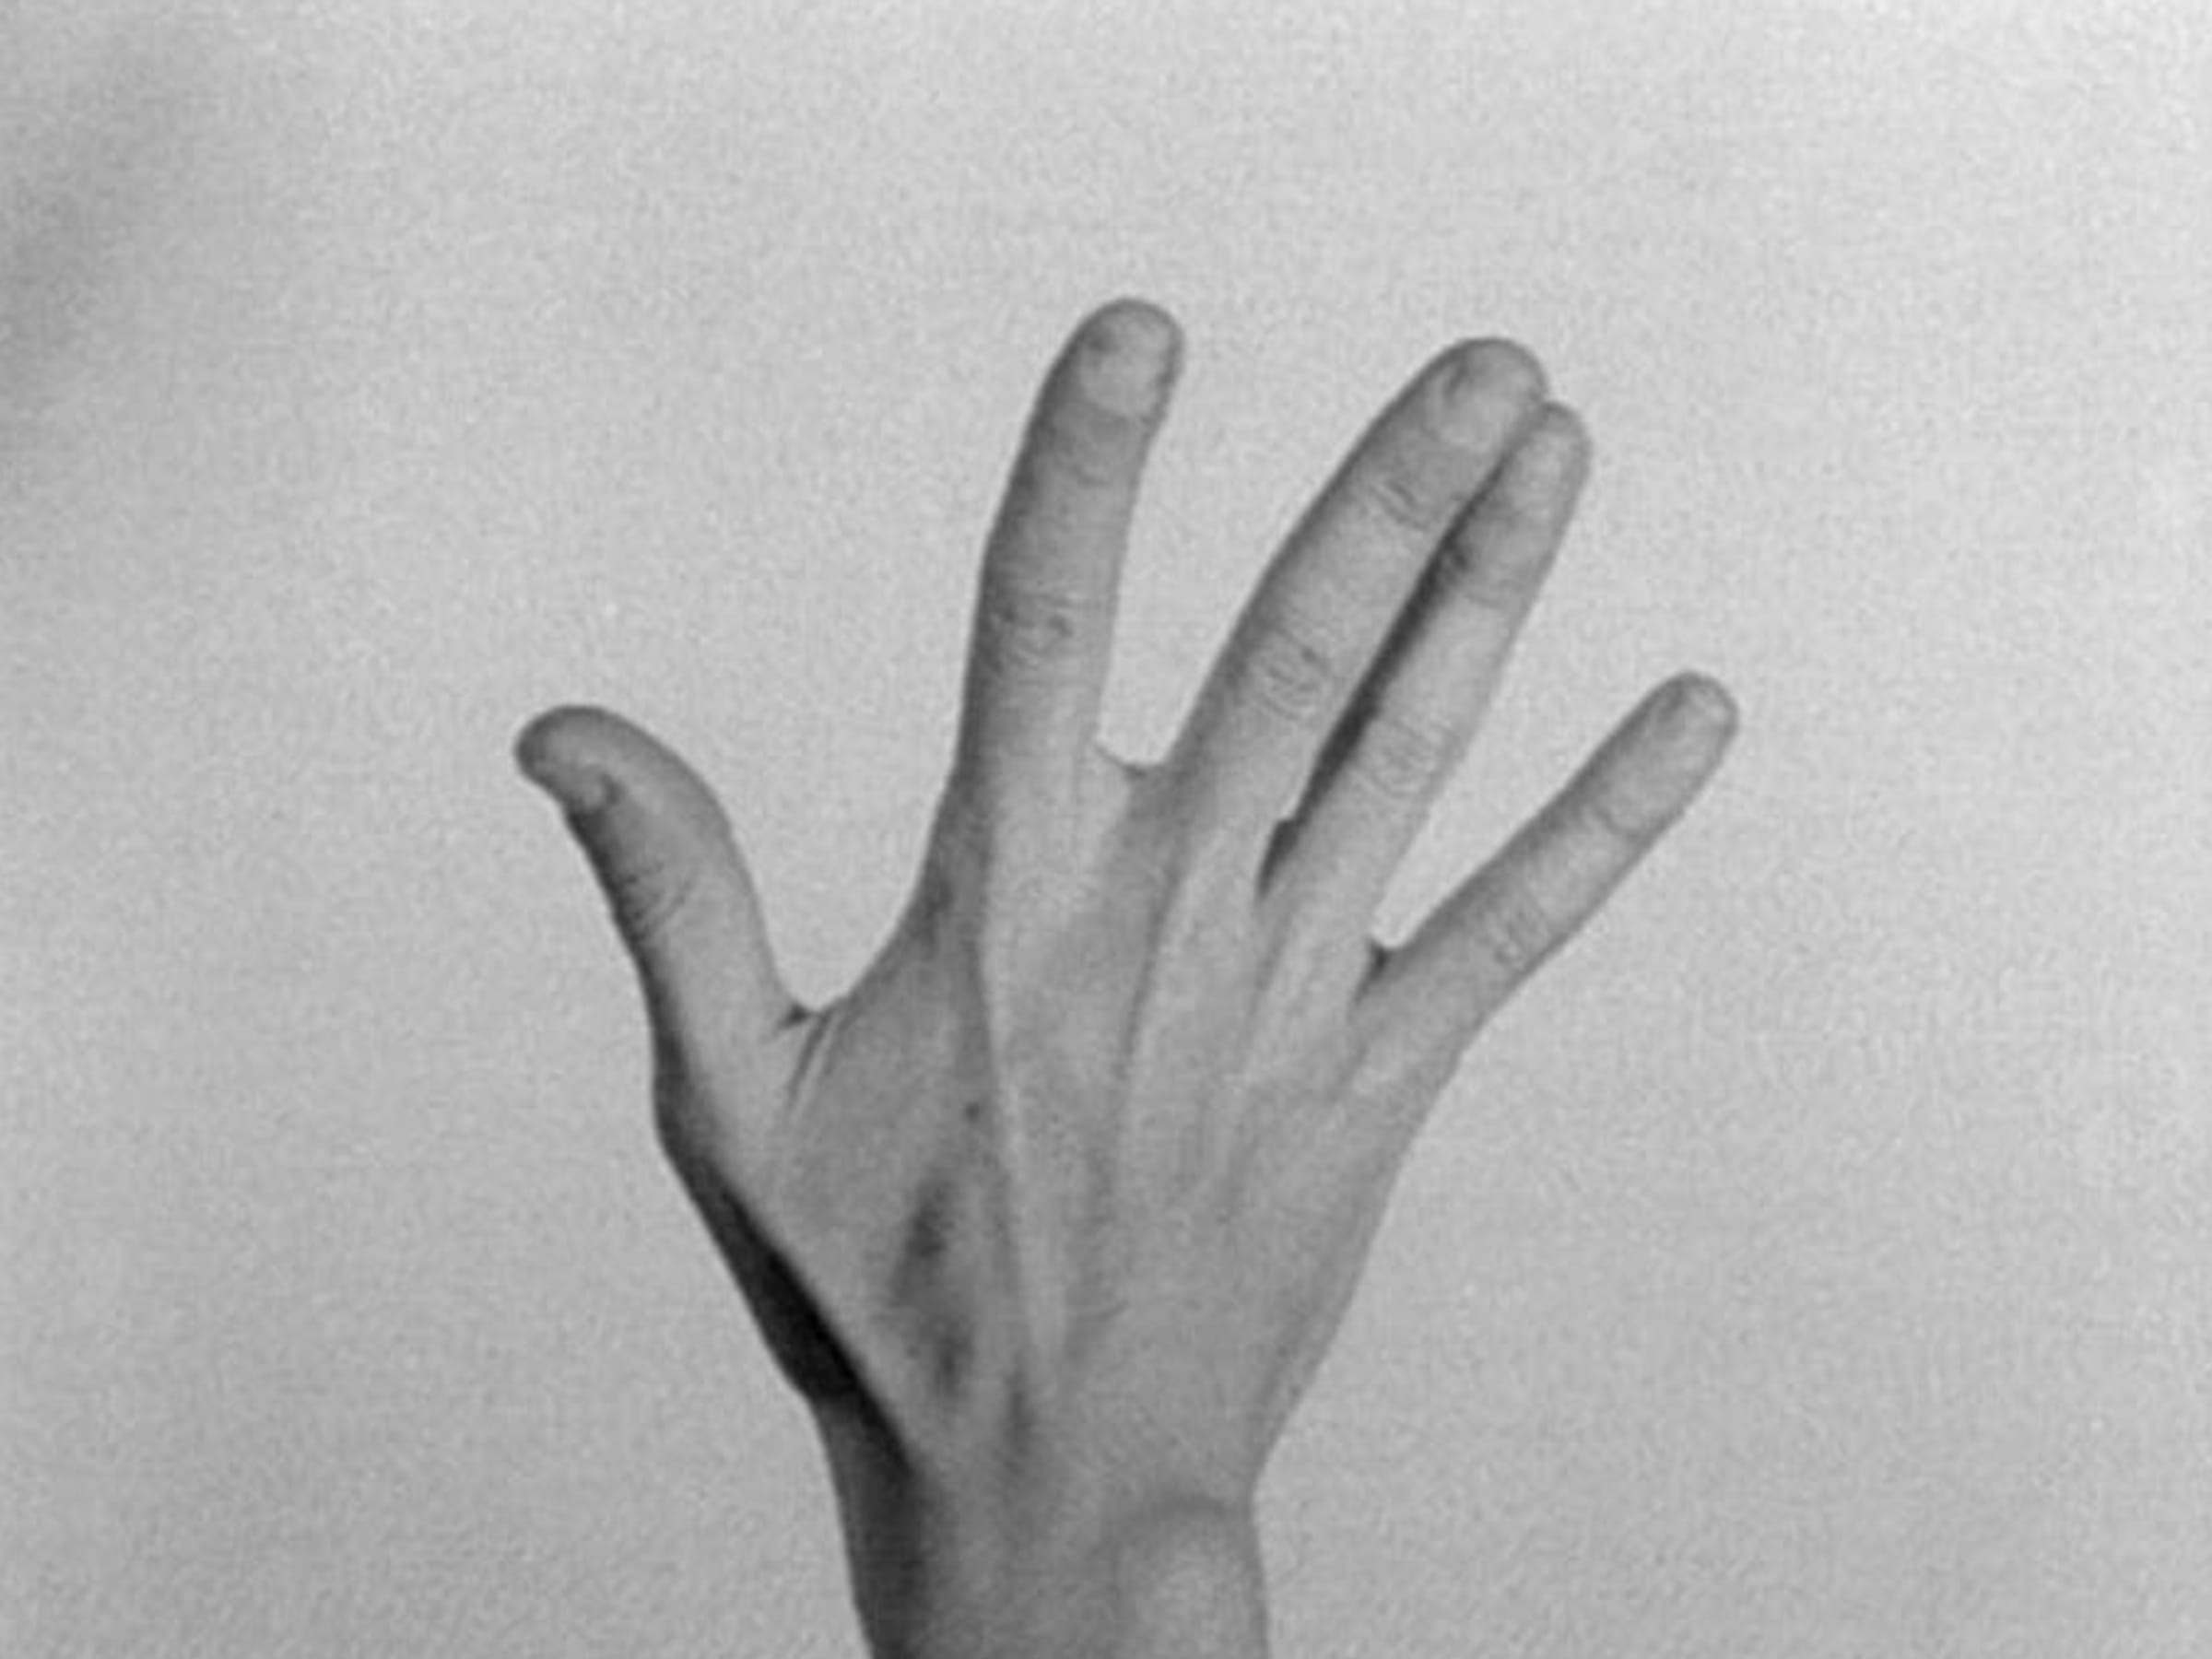 Yvonne Rainer, The Hand Movie, 1966. Courtesy of the artist and Mendes Wood DM.